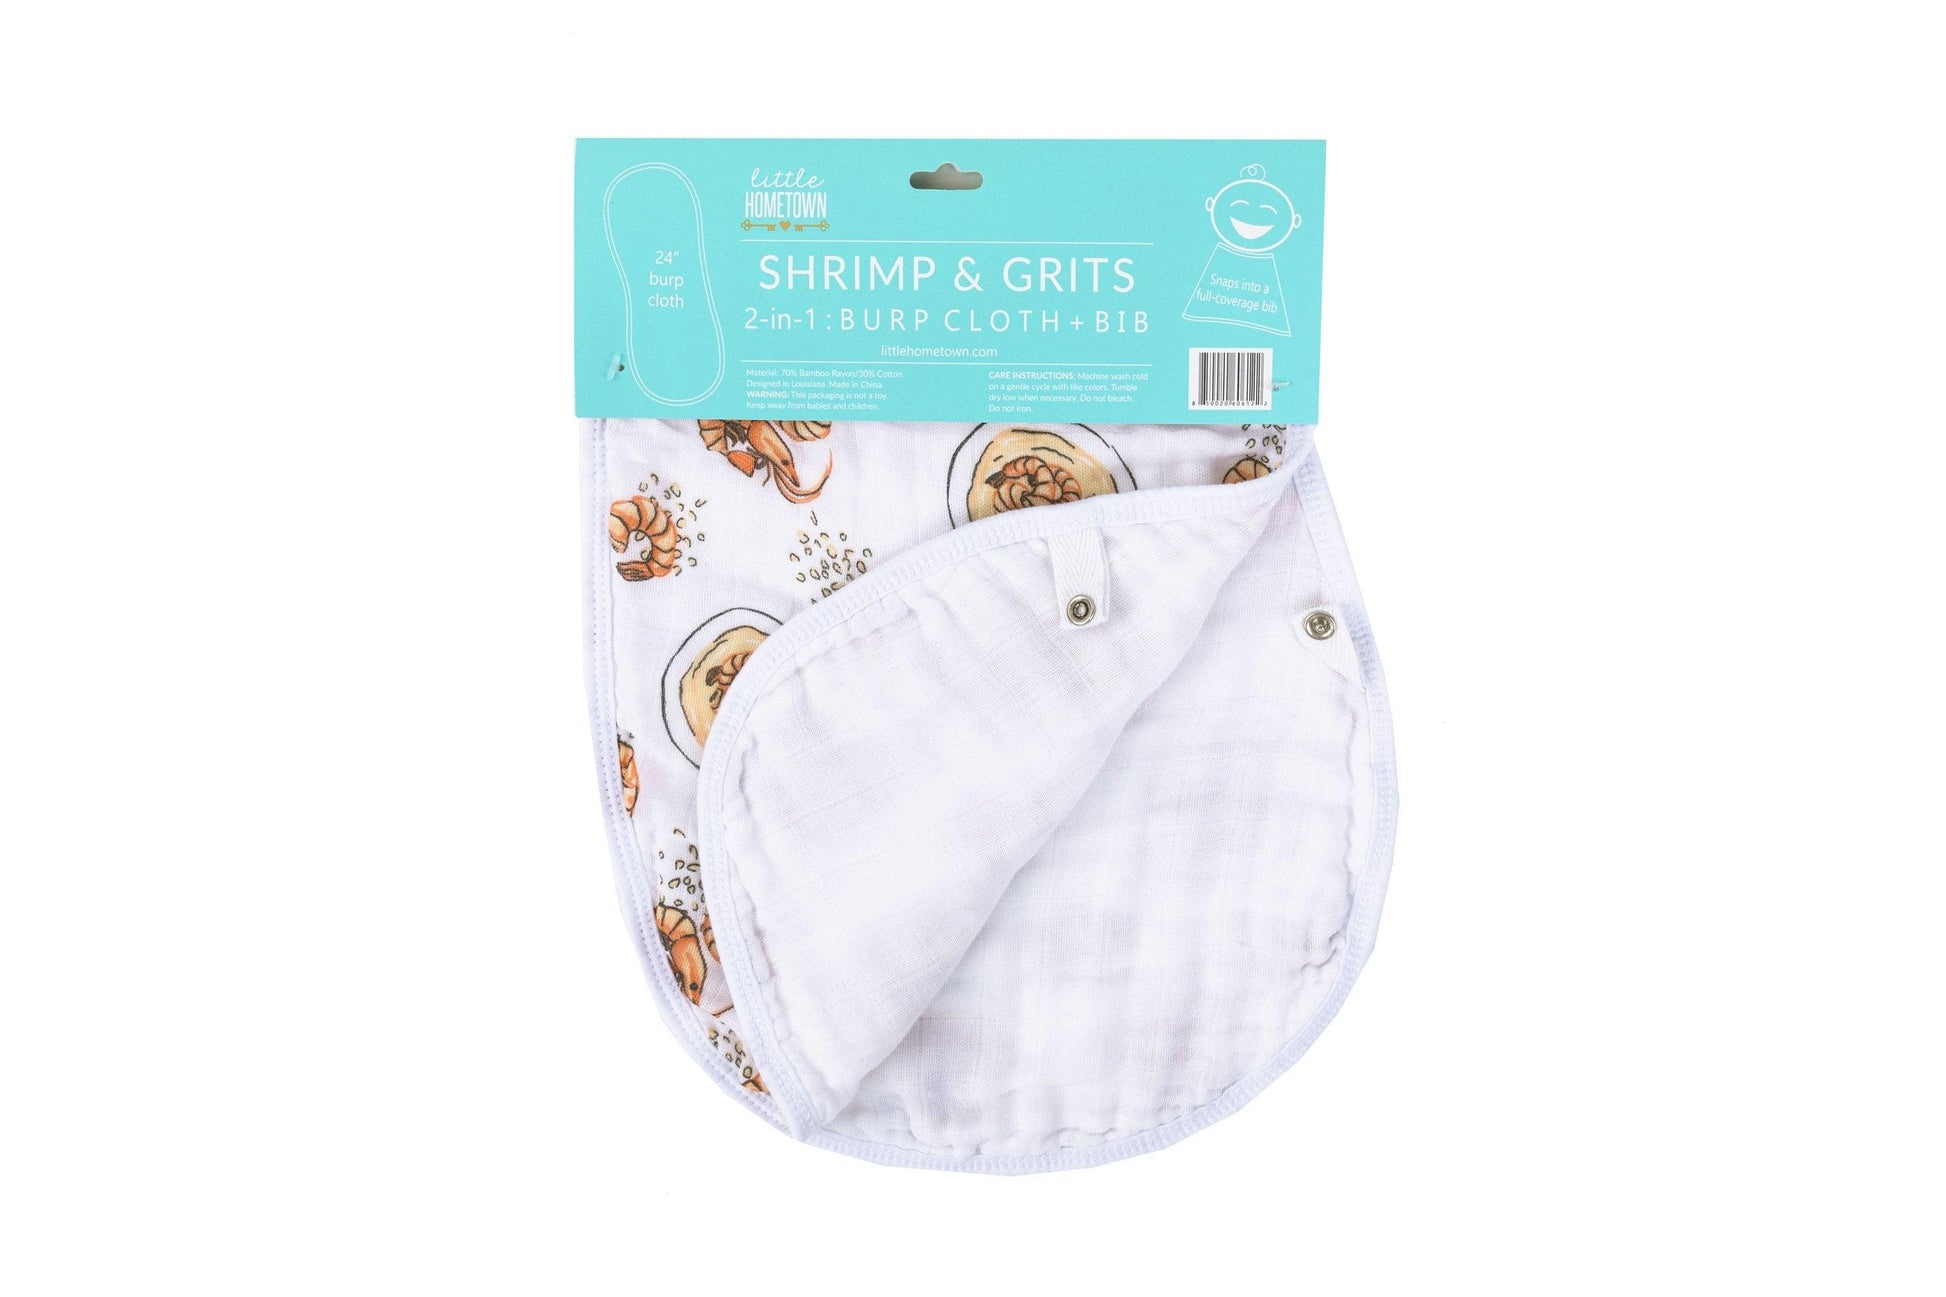 Baby bib and burp cloth set with playful shrimp and grits pattern, featuring pastel colors and soft fabric.